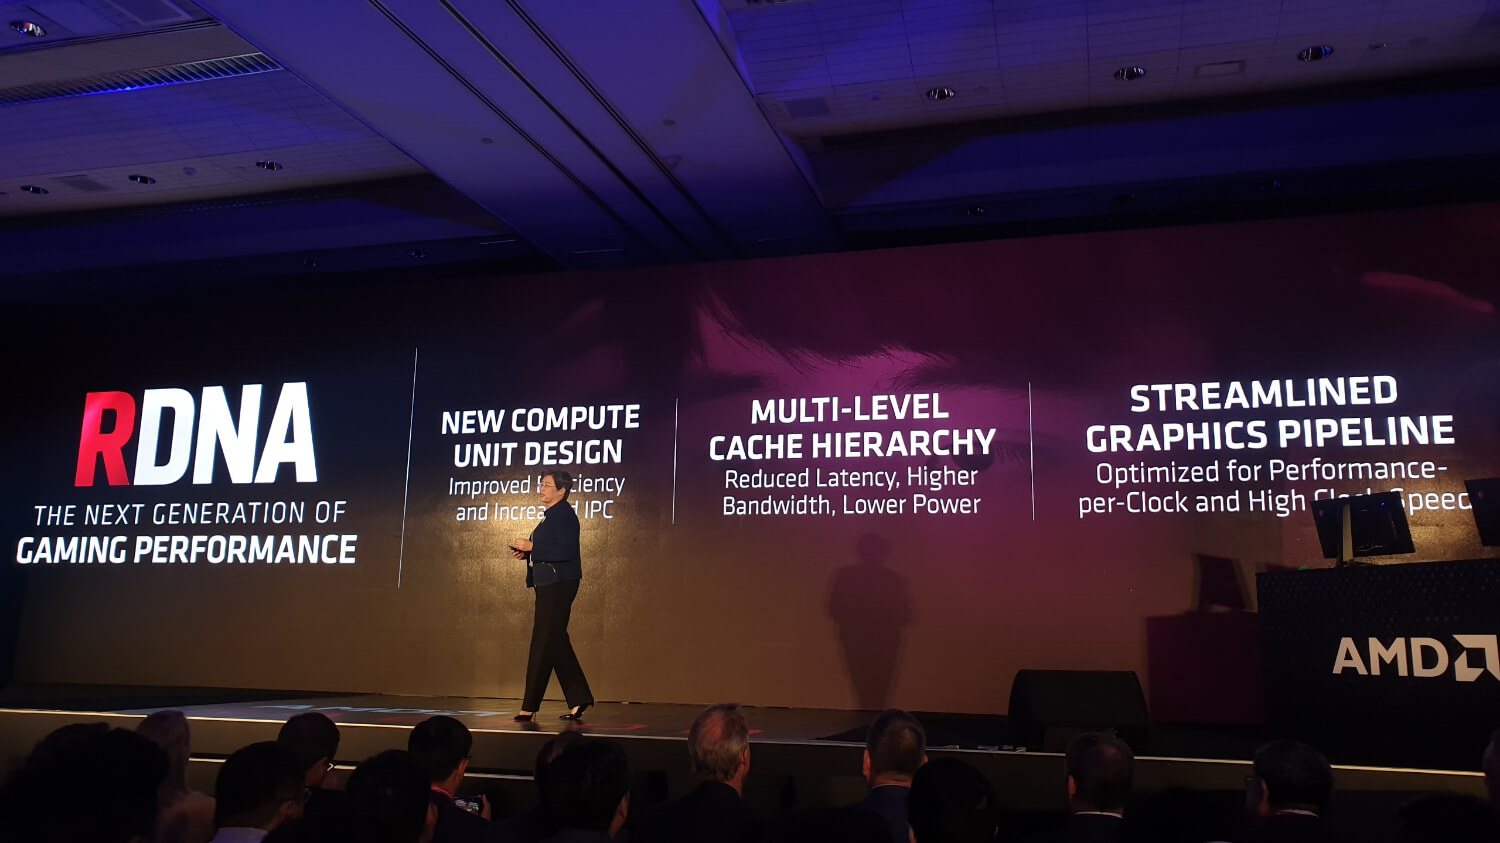 AMD lands deal with Samsung, will bring AMD's RDNA graphics to smartphones